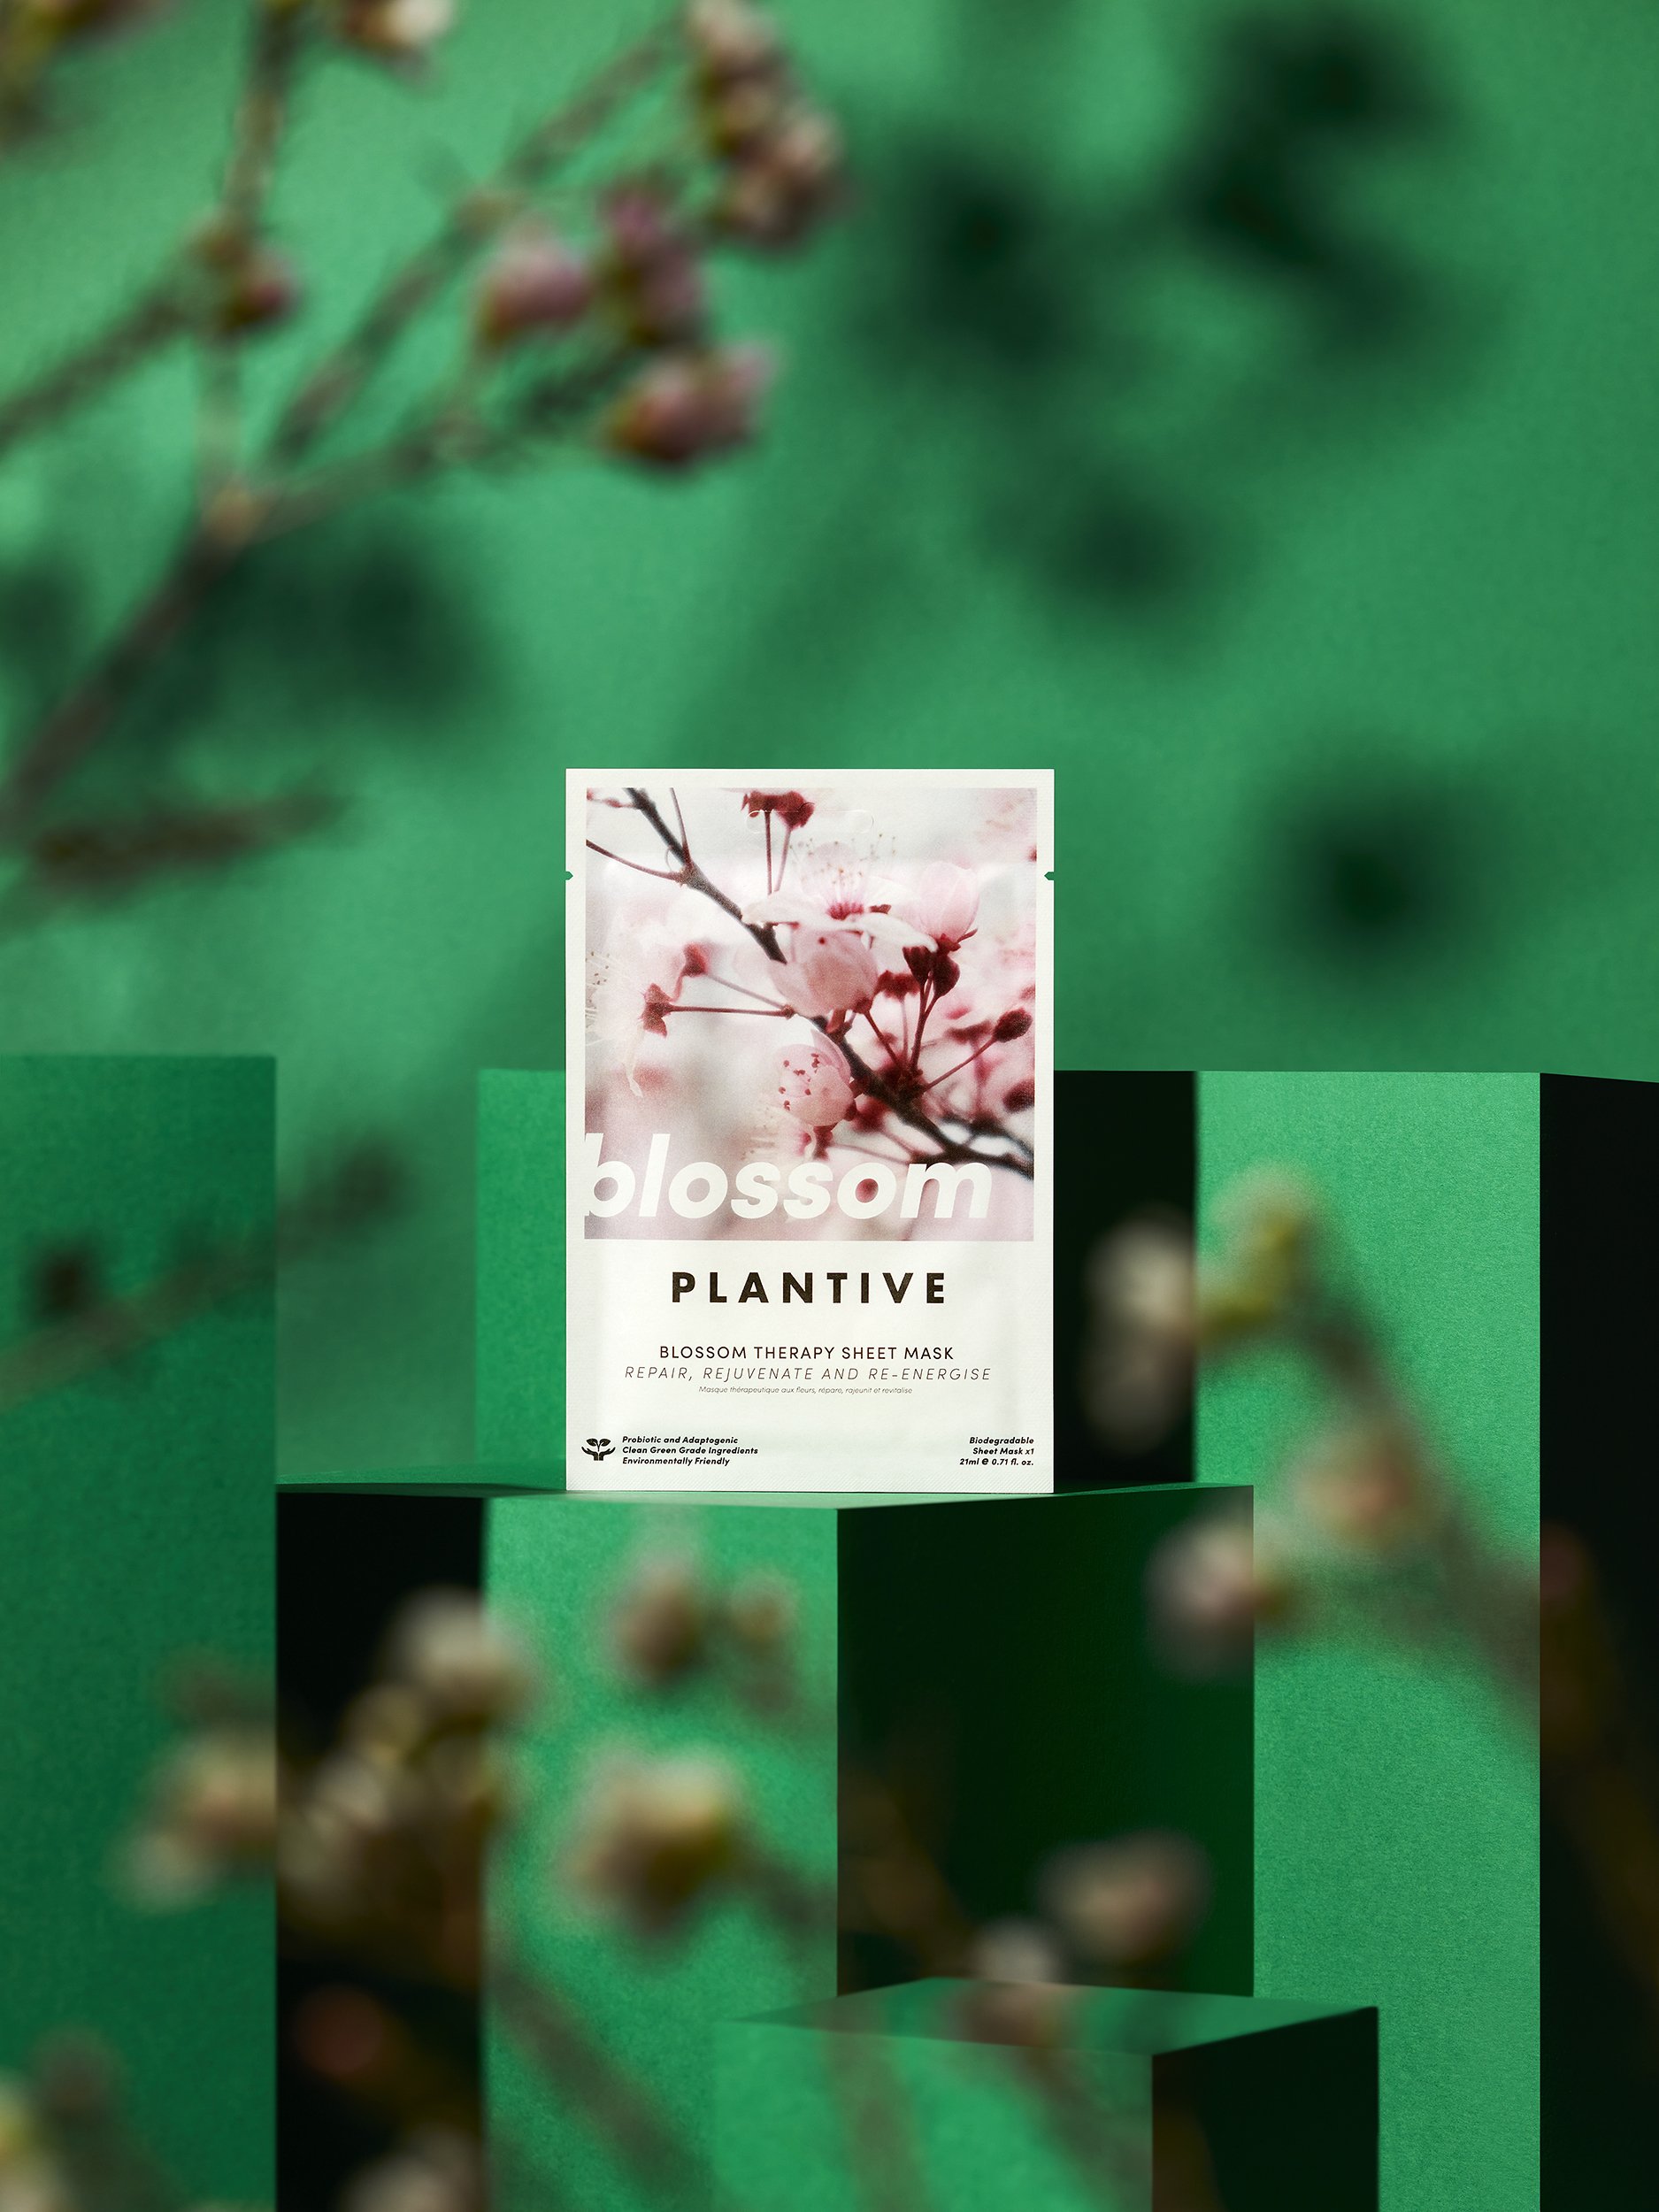 Plantive Blossom Therapy Face Mask - product photographer Simon Lyle Ritchie